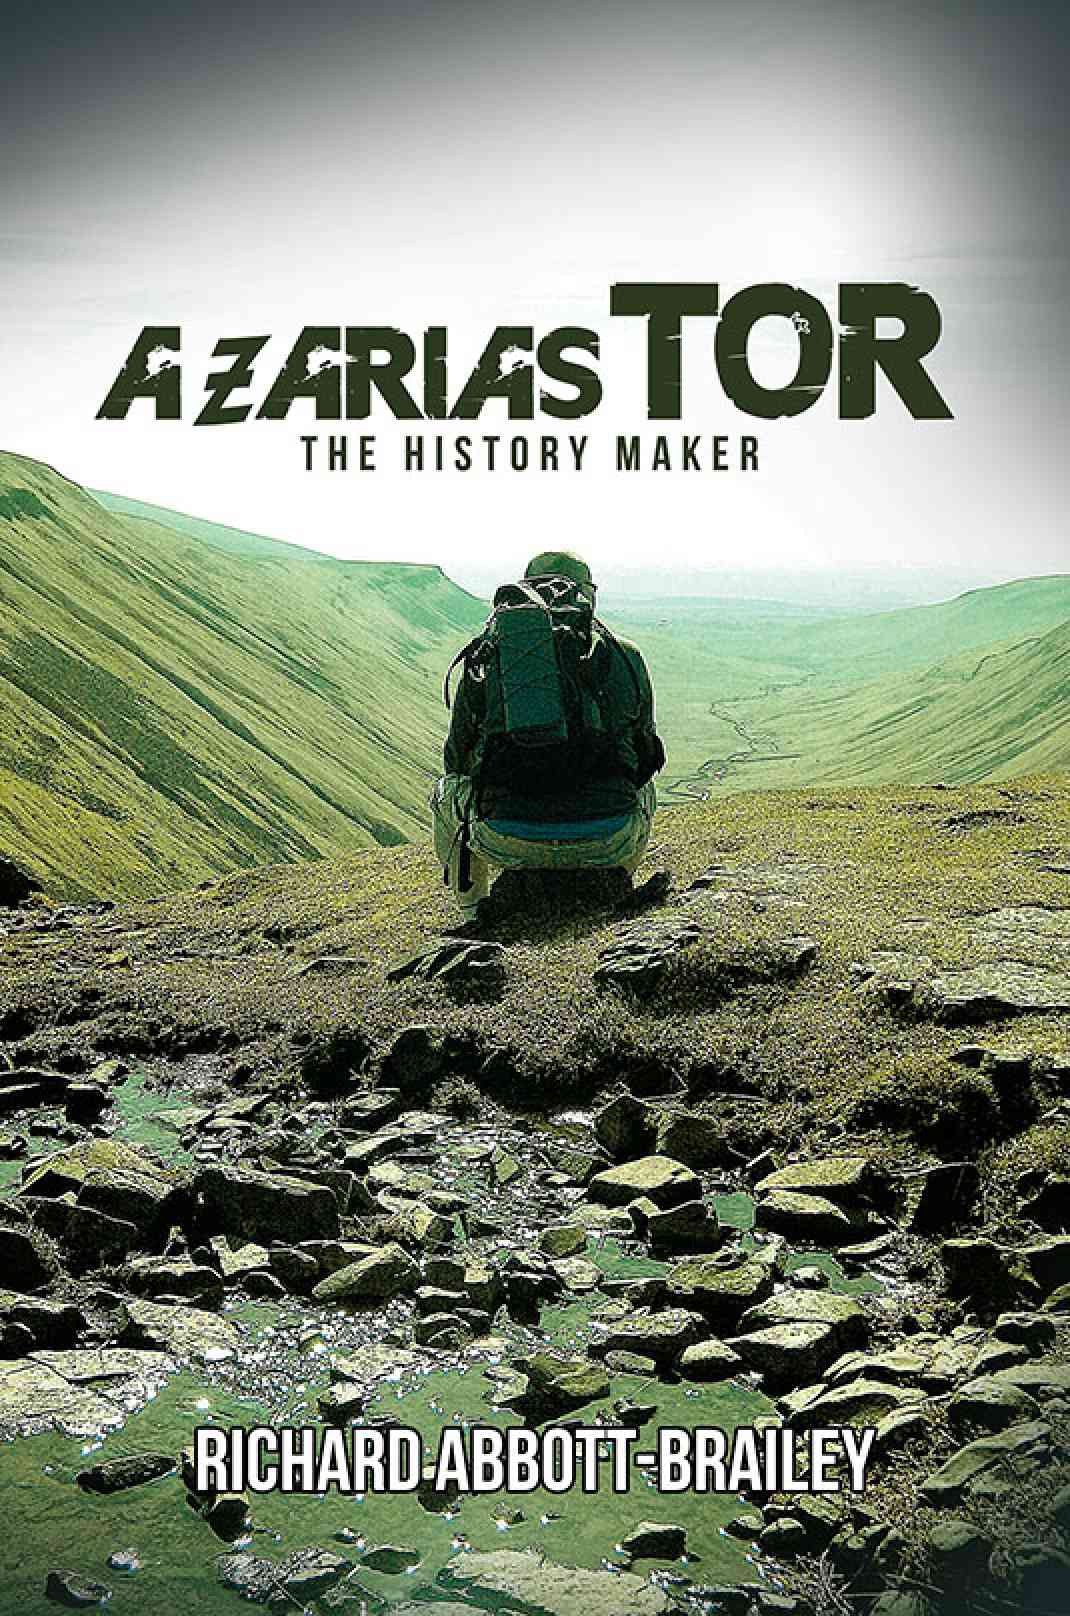 Cryptic and Intriguing ‘Azarias Tor: The History Maker’ featured on NeConnected